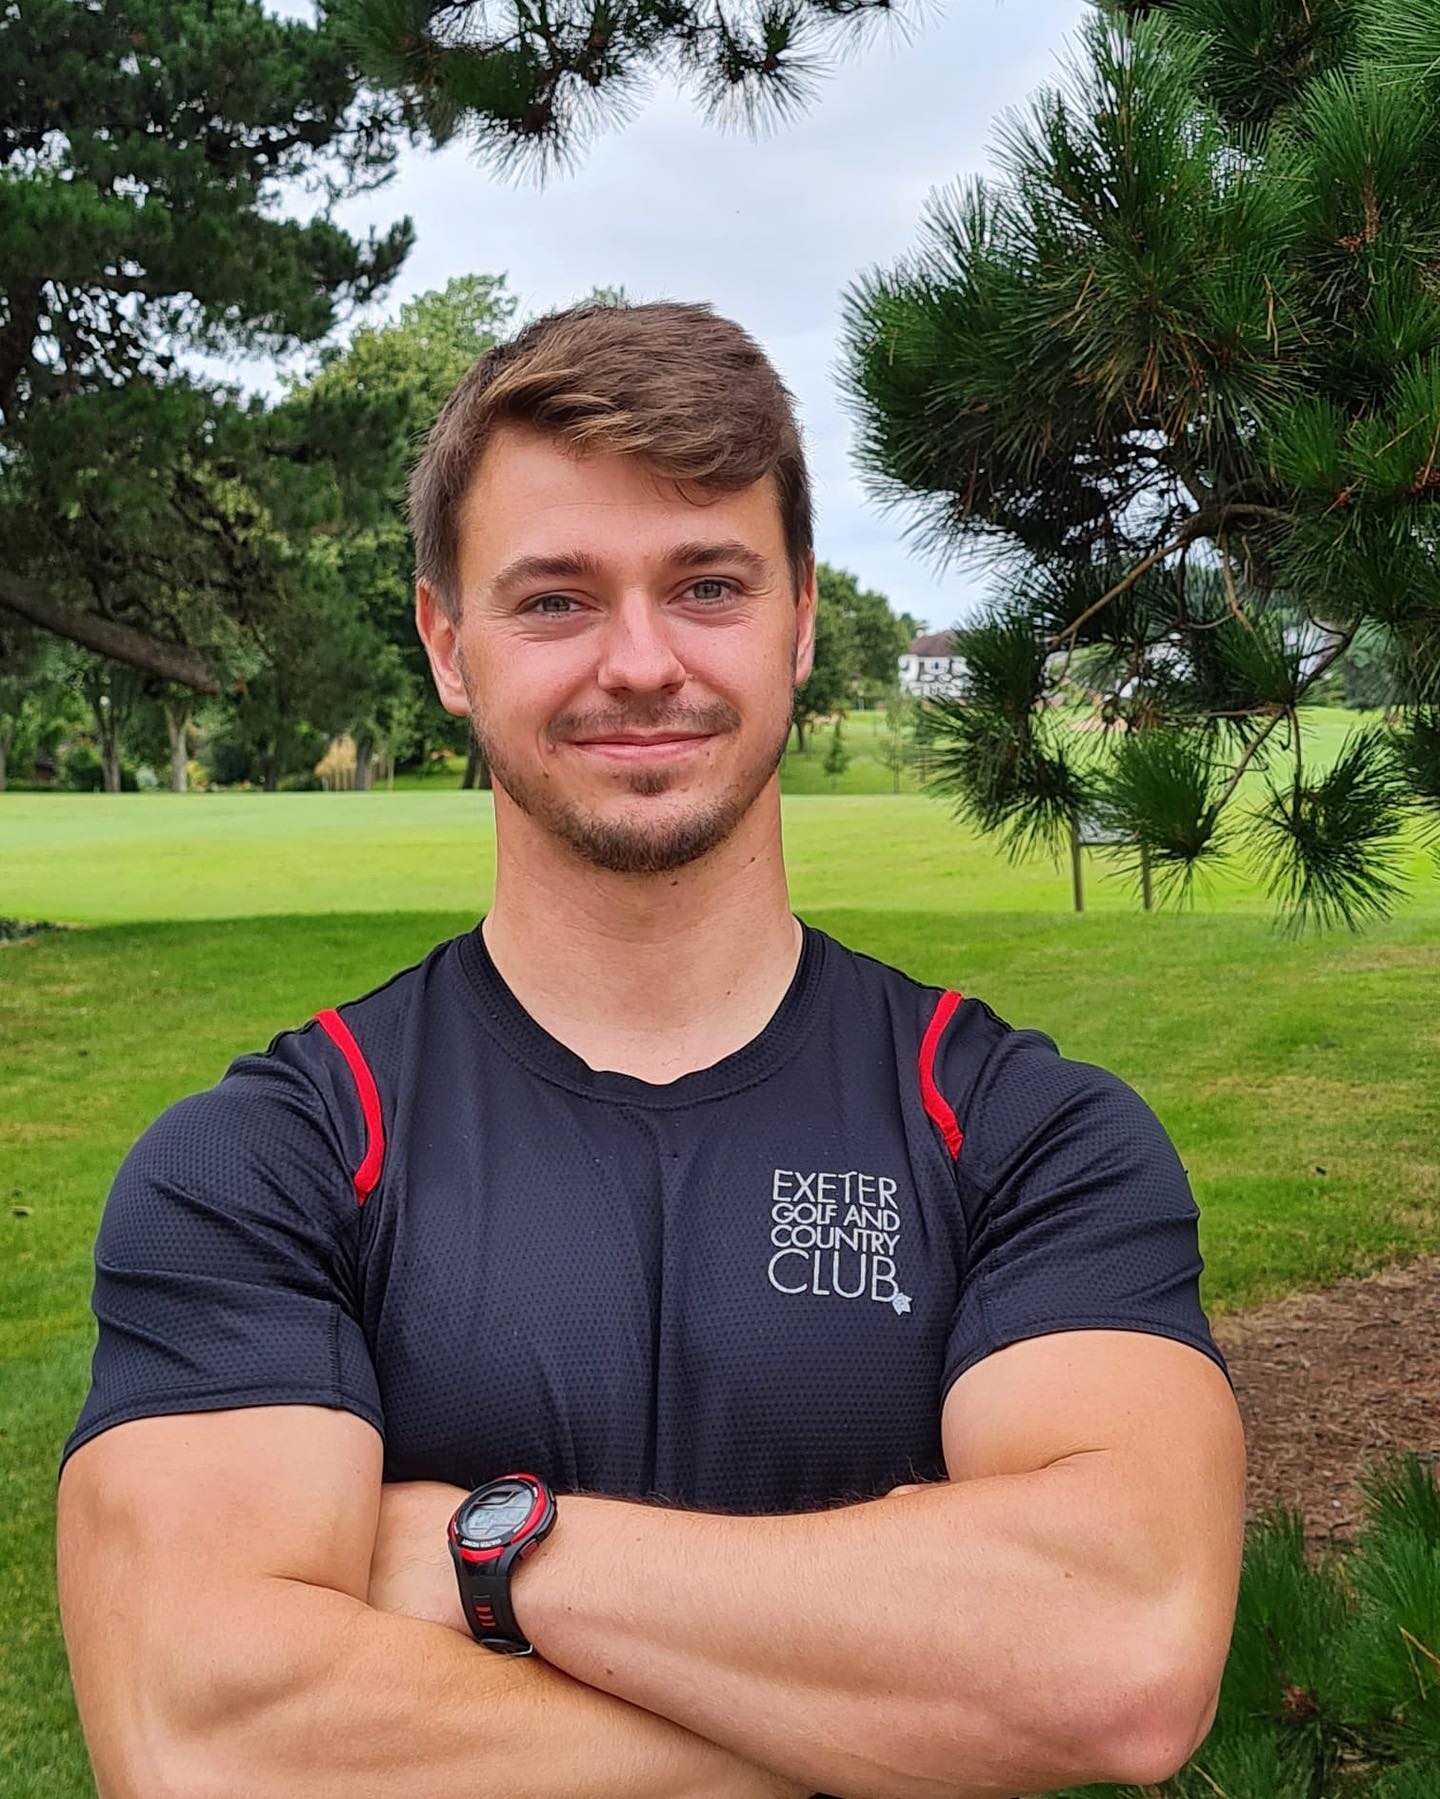 Jason Kennard, personal trainer, jason kennard pt, personal training exeter, exeter golf and country club, book a pt